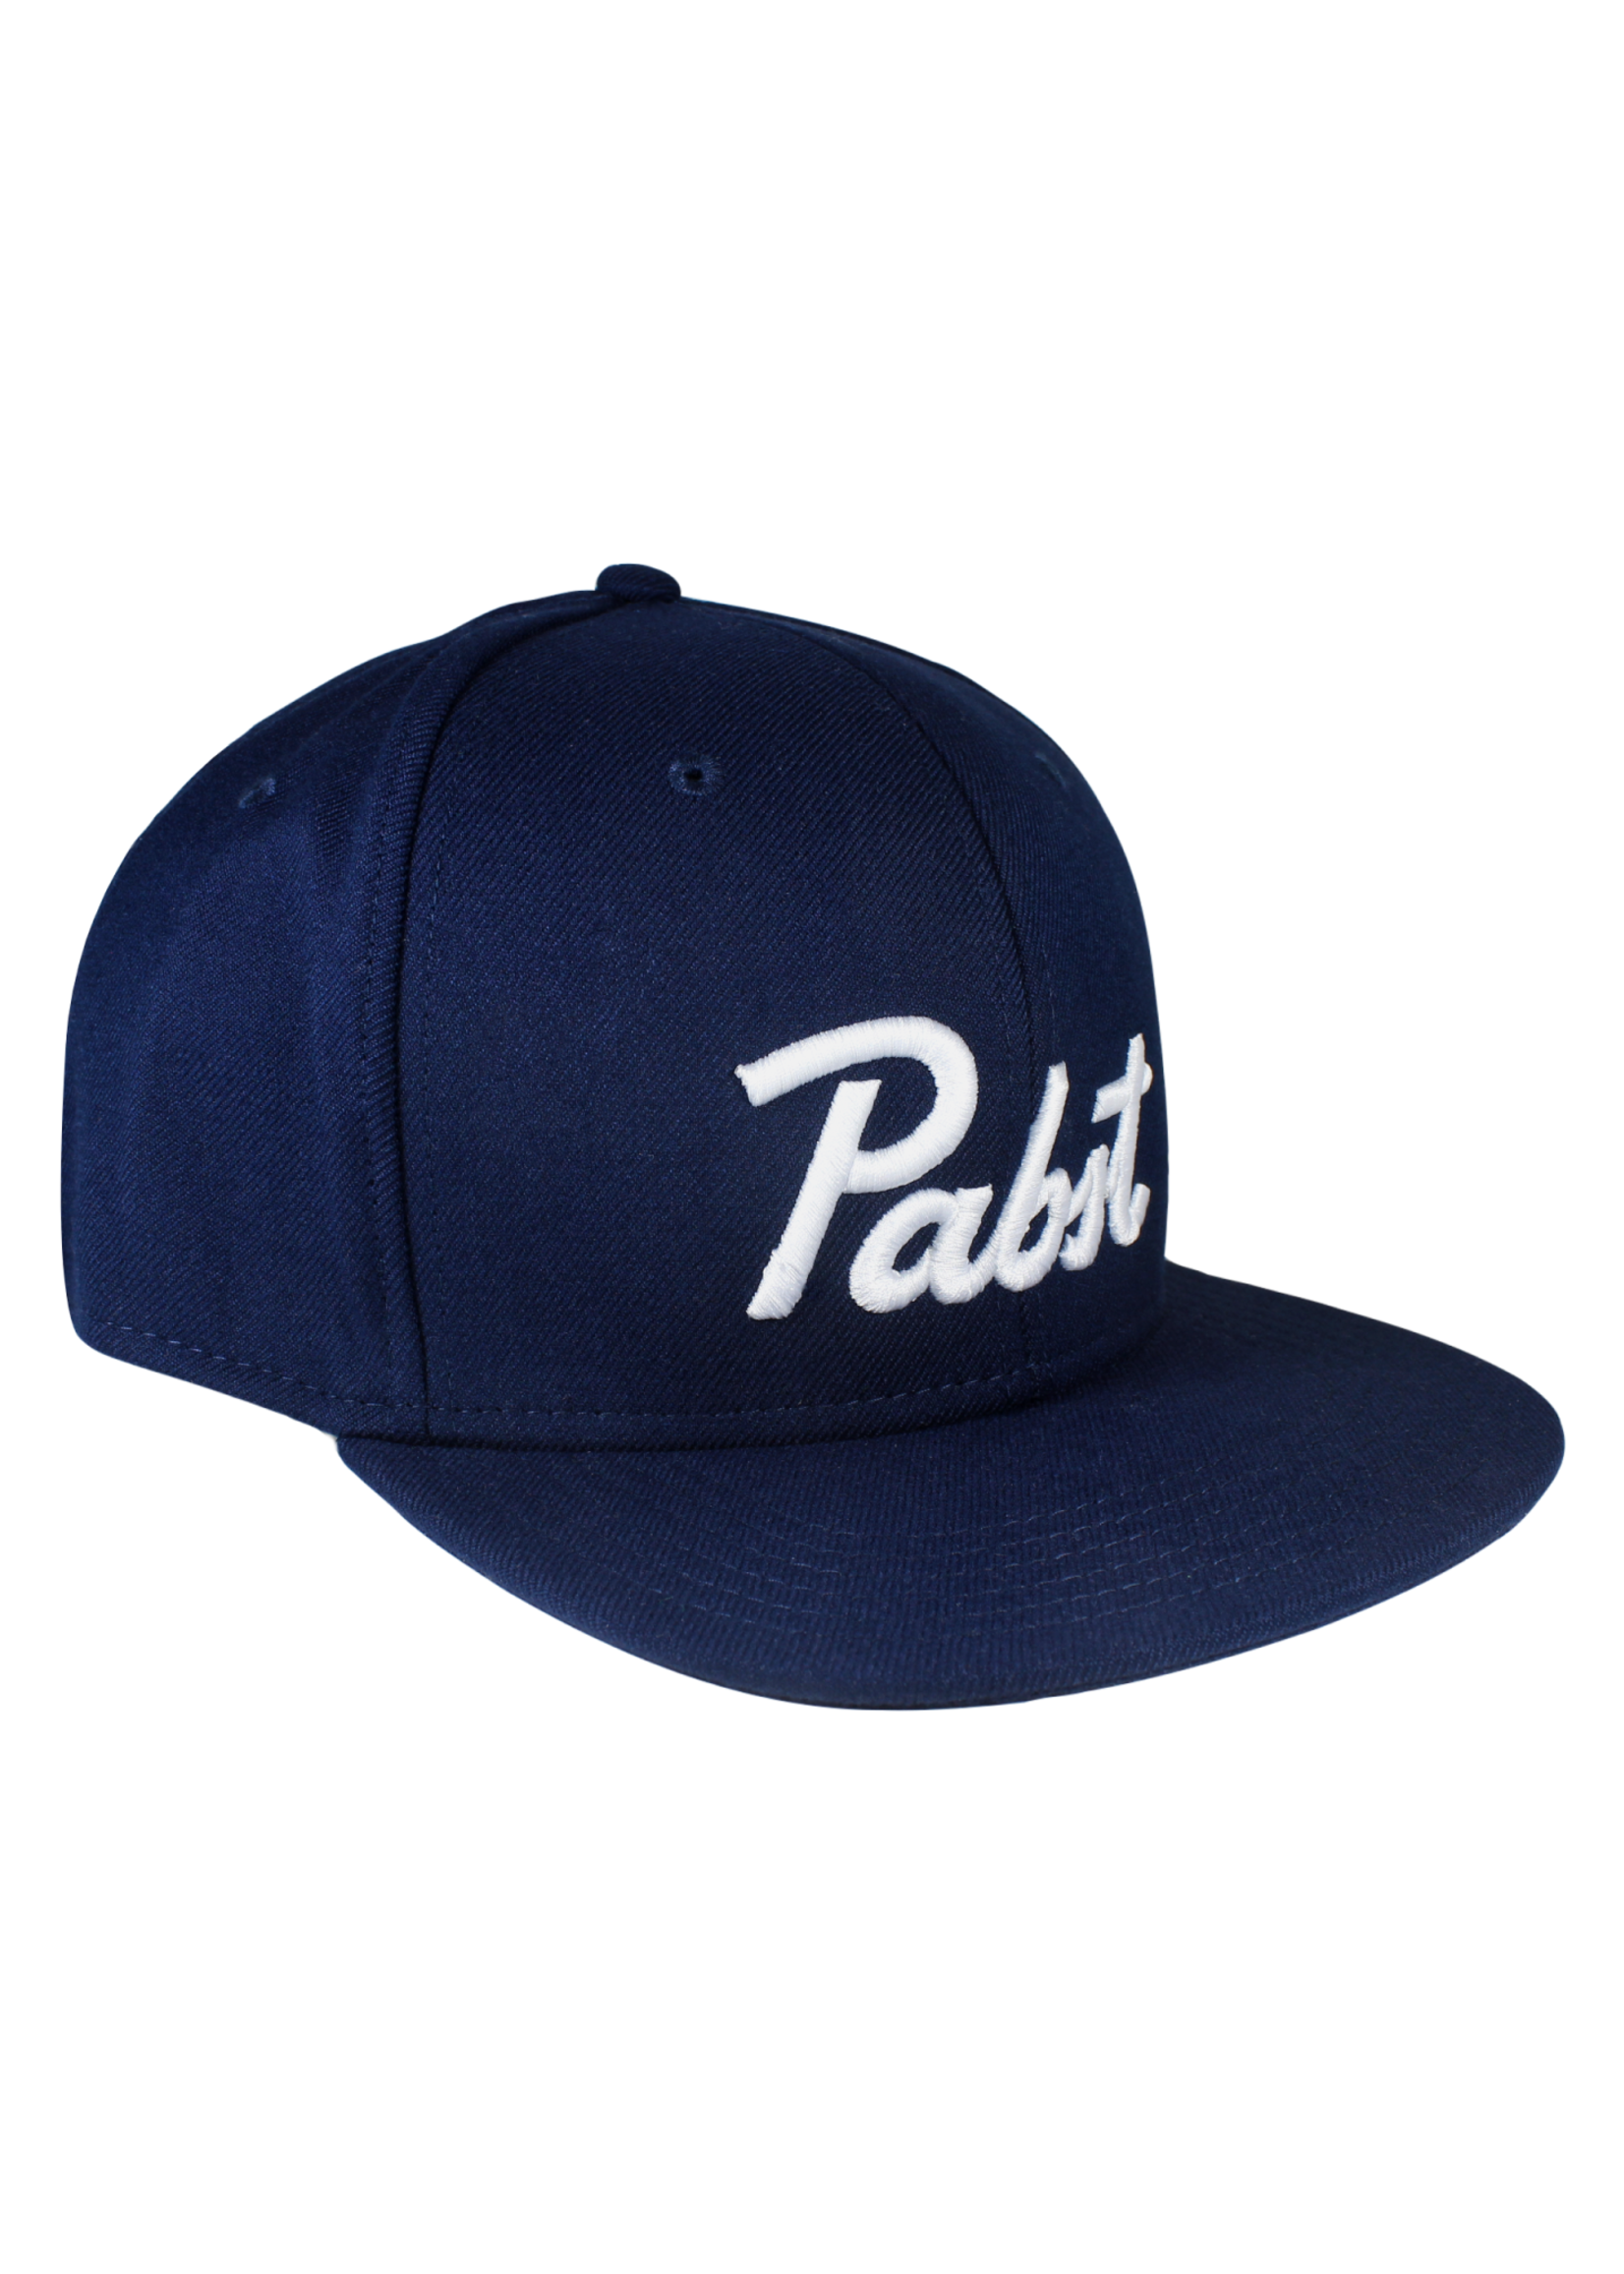 Pabst Pabst Navy Under Armour Cap